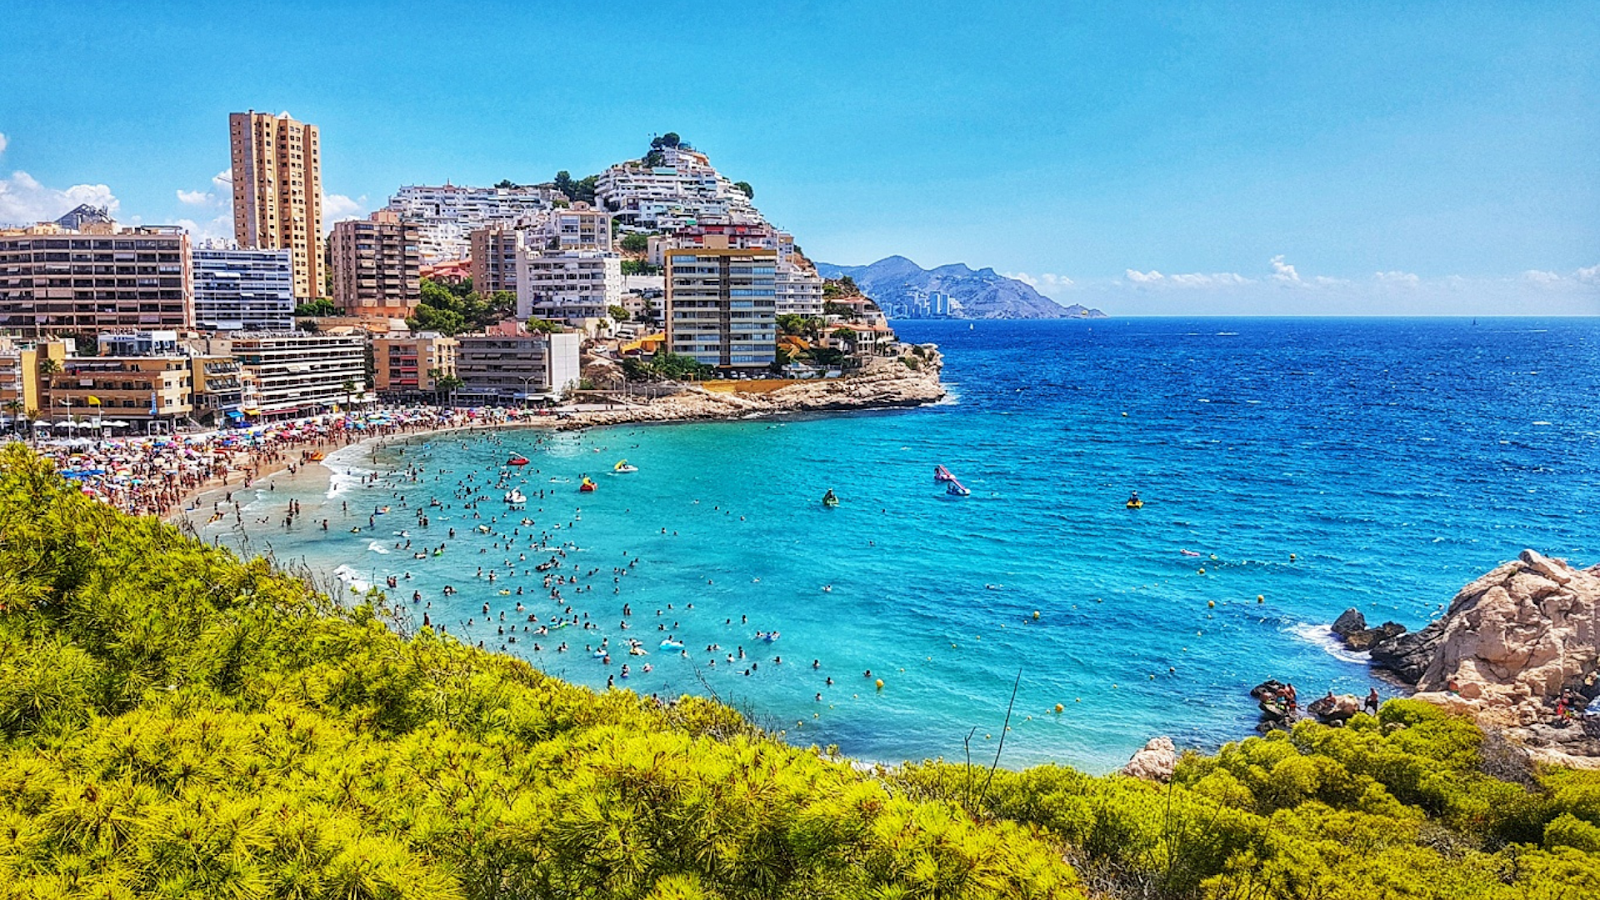 Cala de Finestrat with the beach and city in the background on a sunny day.